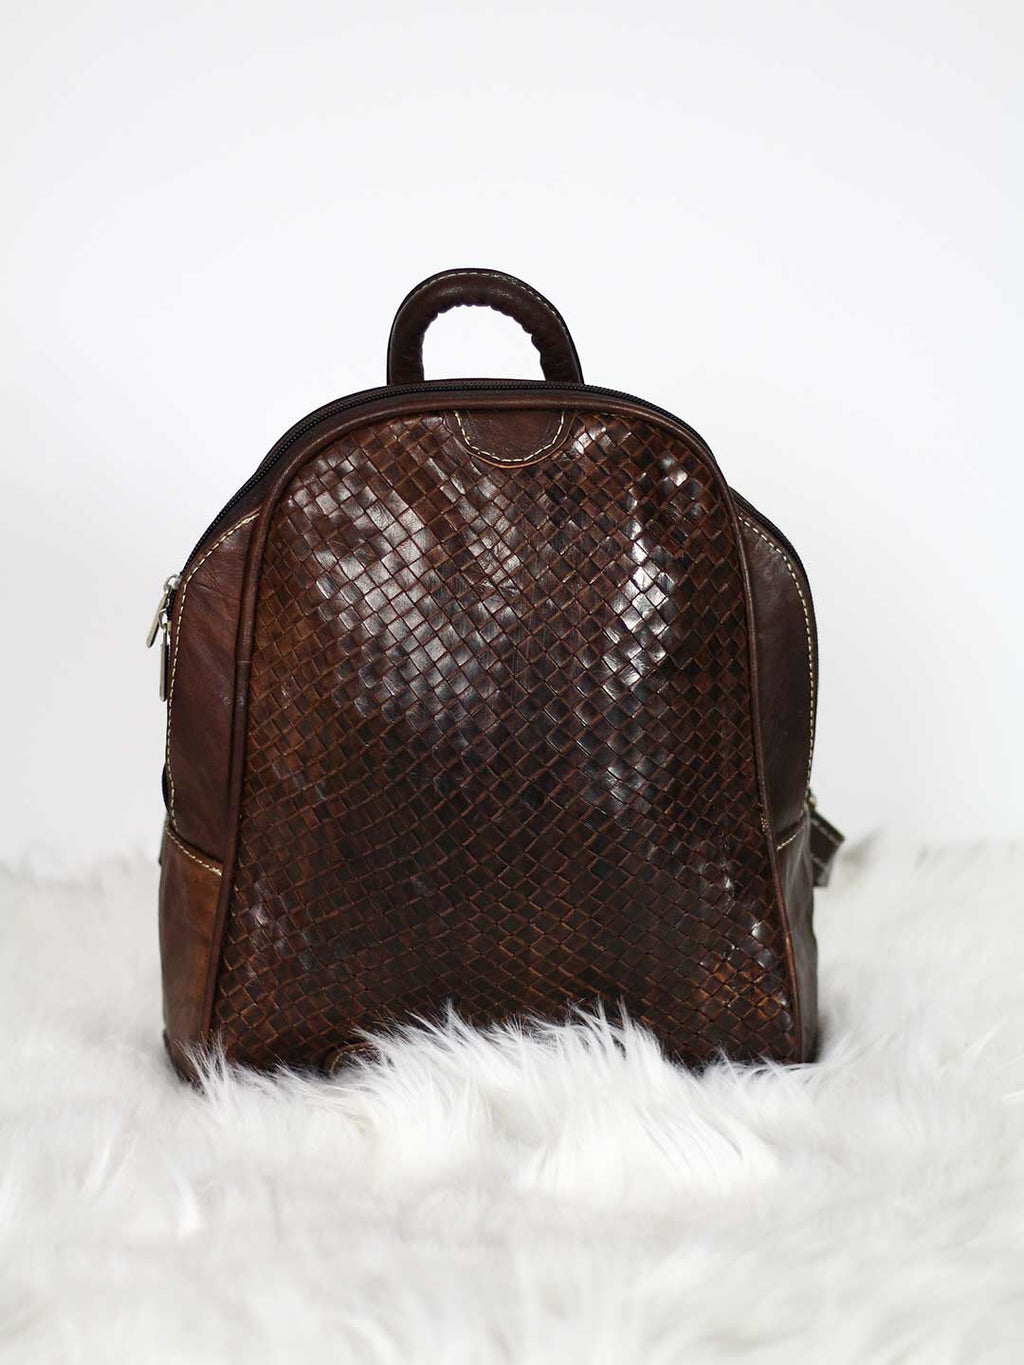 Dark Brown Woven Leather Backpack